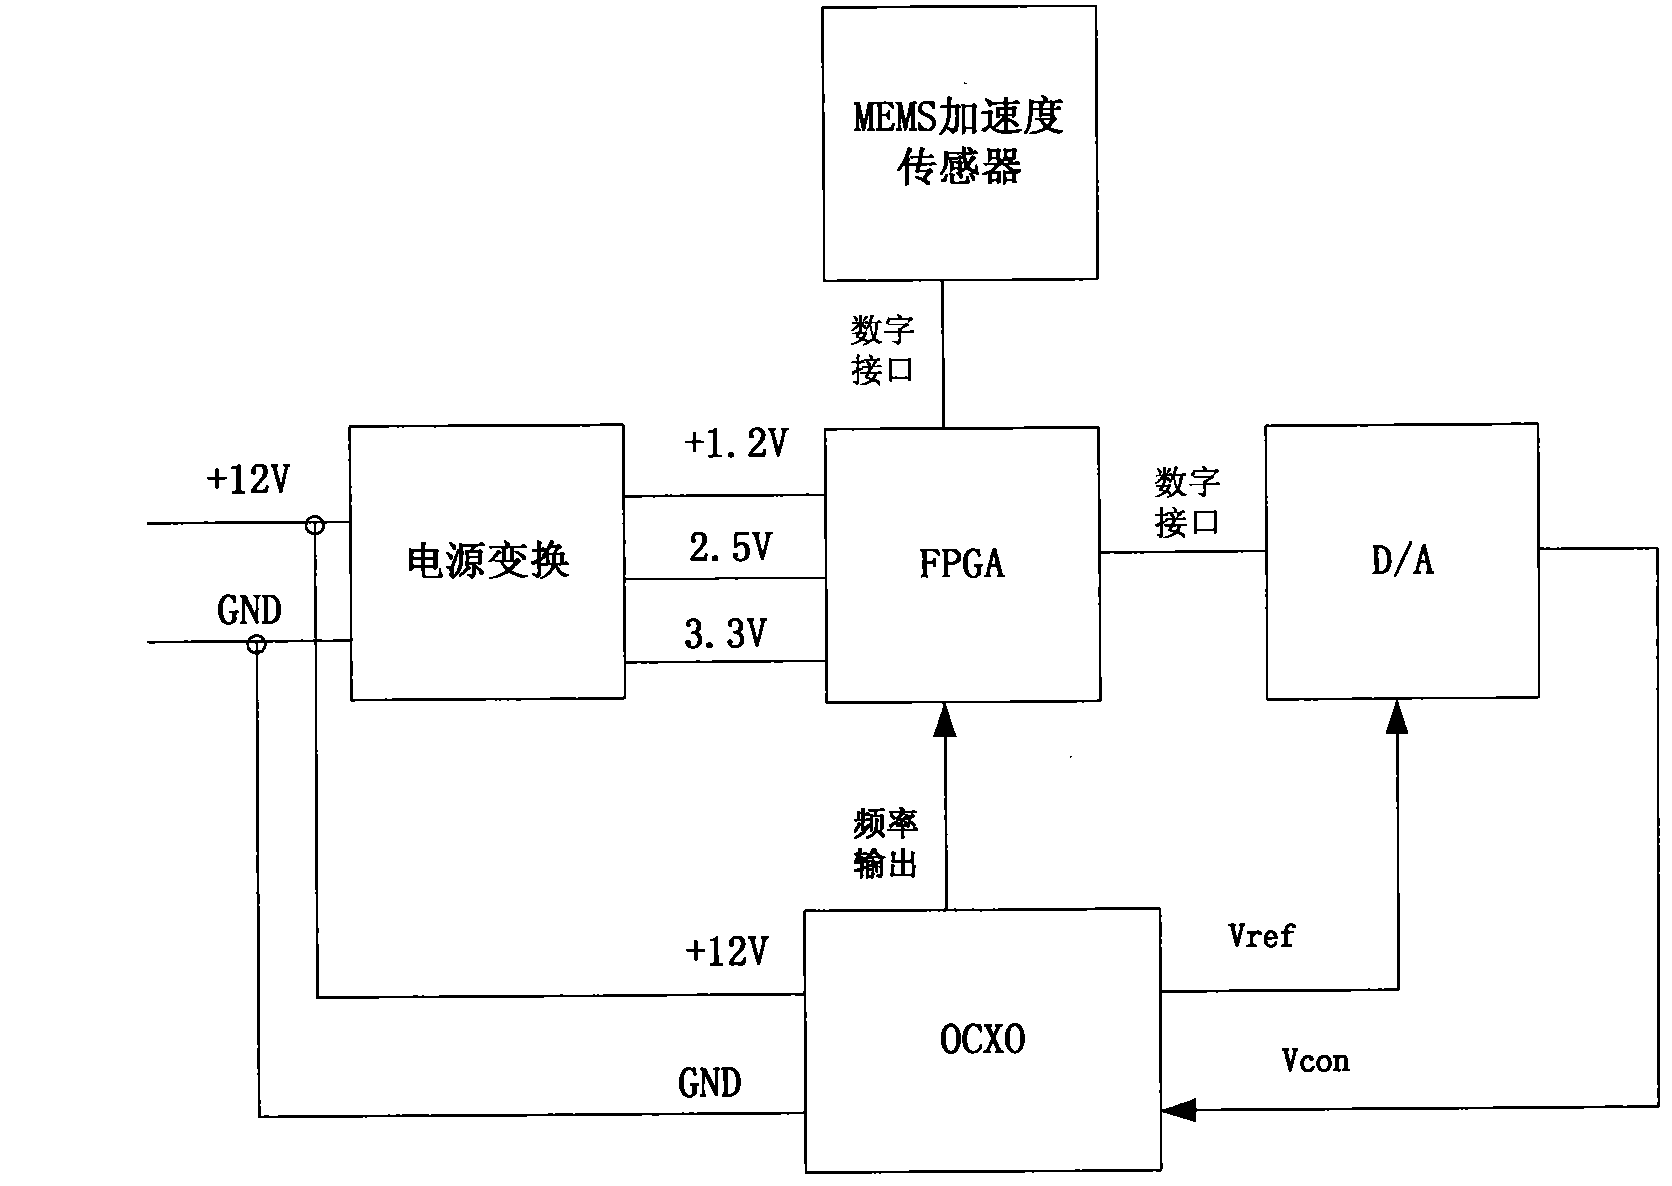 Oven controlled crystal oscillator (OCXO) with acceleration compensation